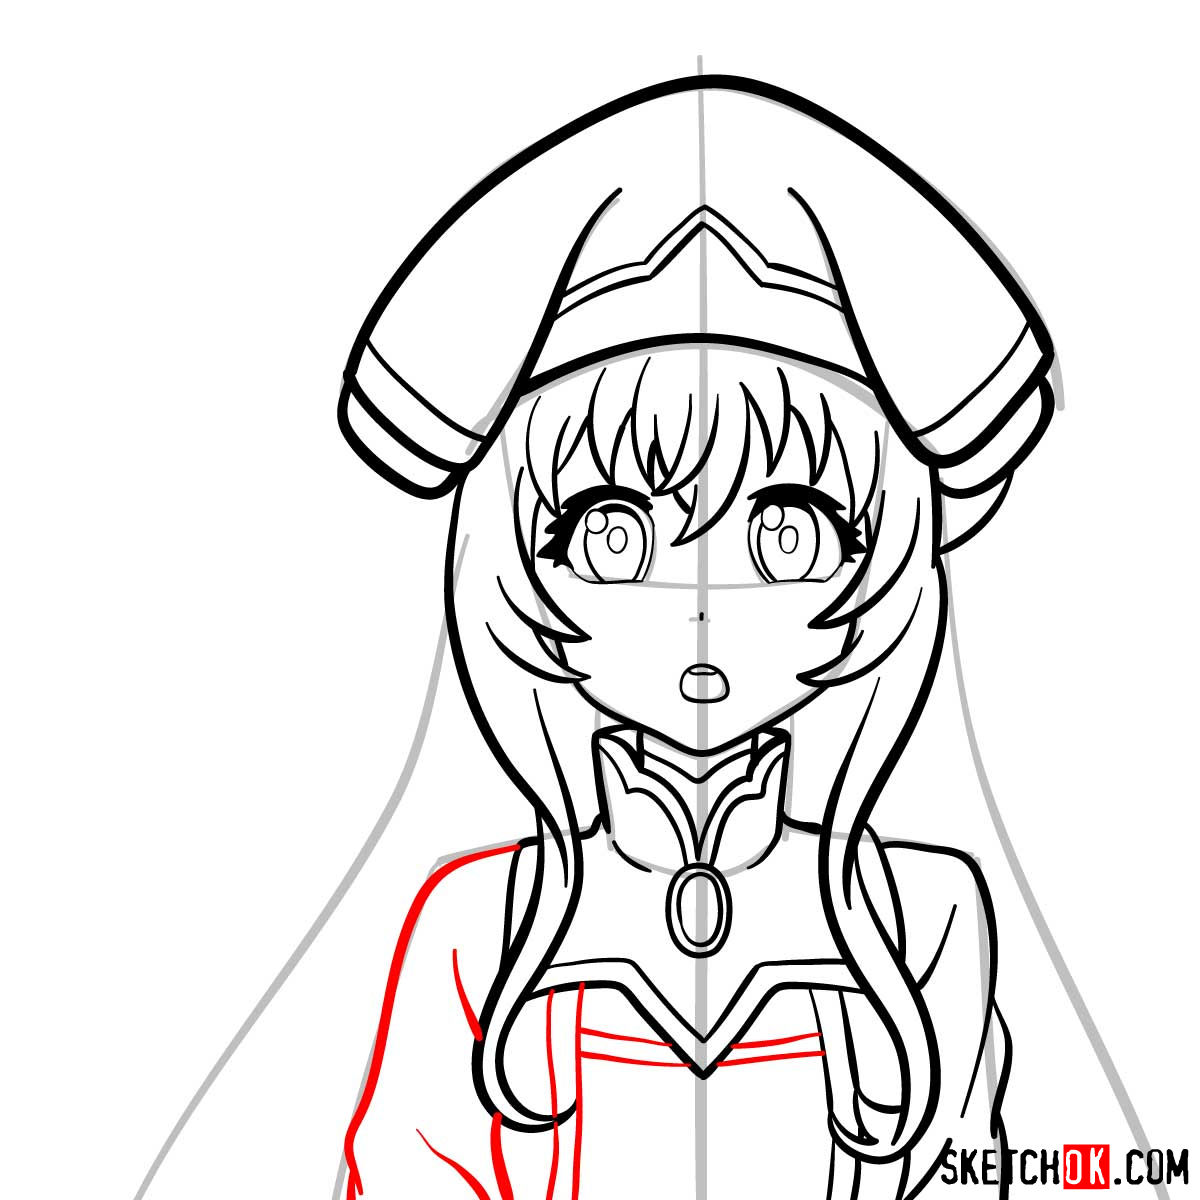 Drawing the Blond Priestess from Goblin Slayer anime in 14 steps - step 10